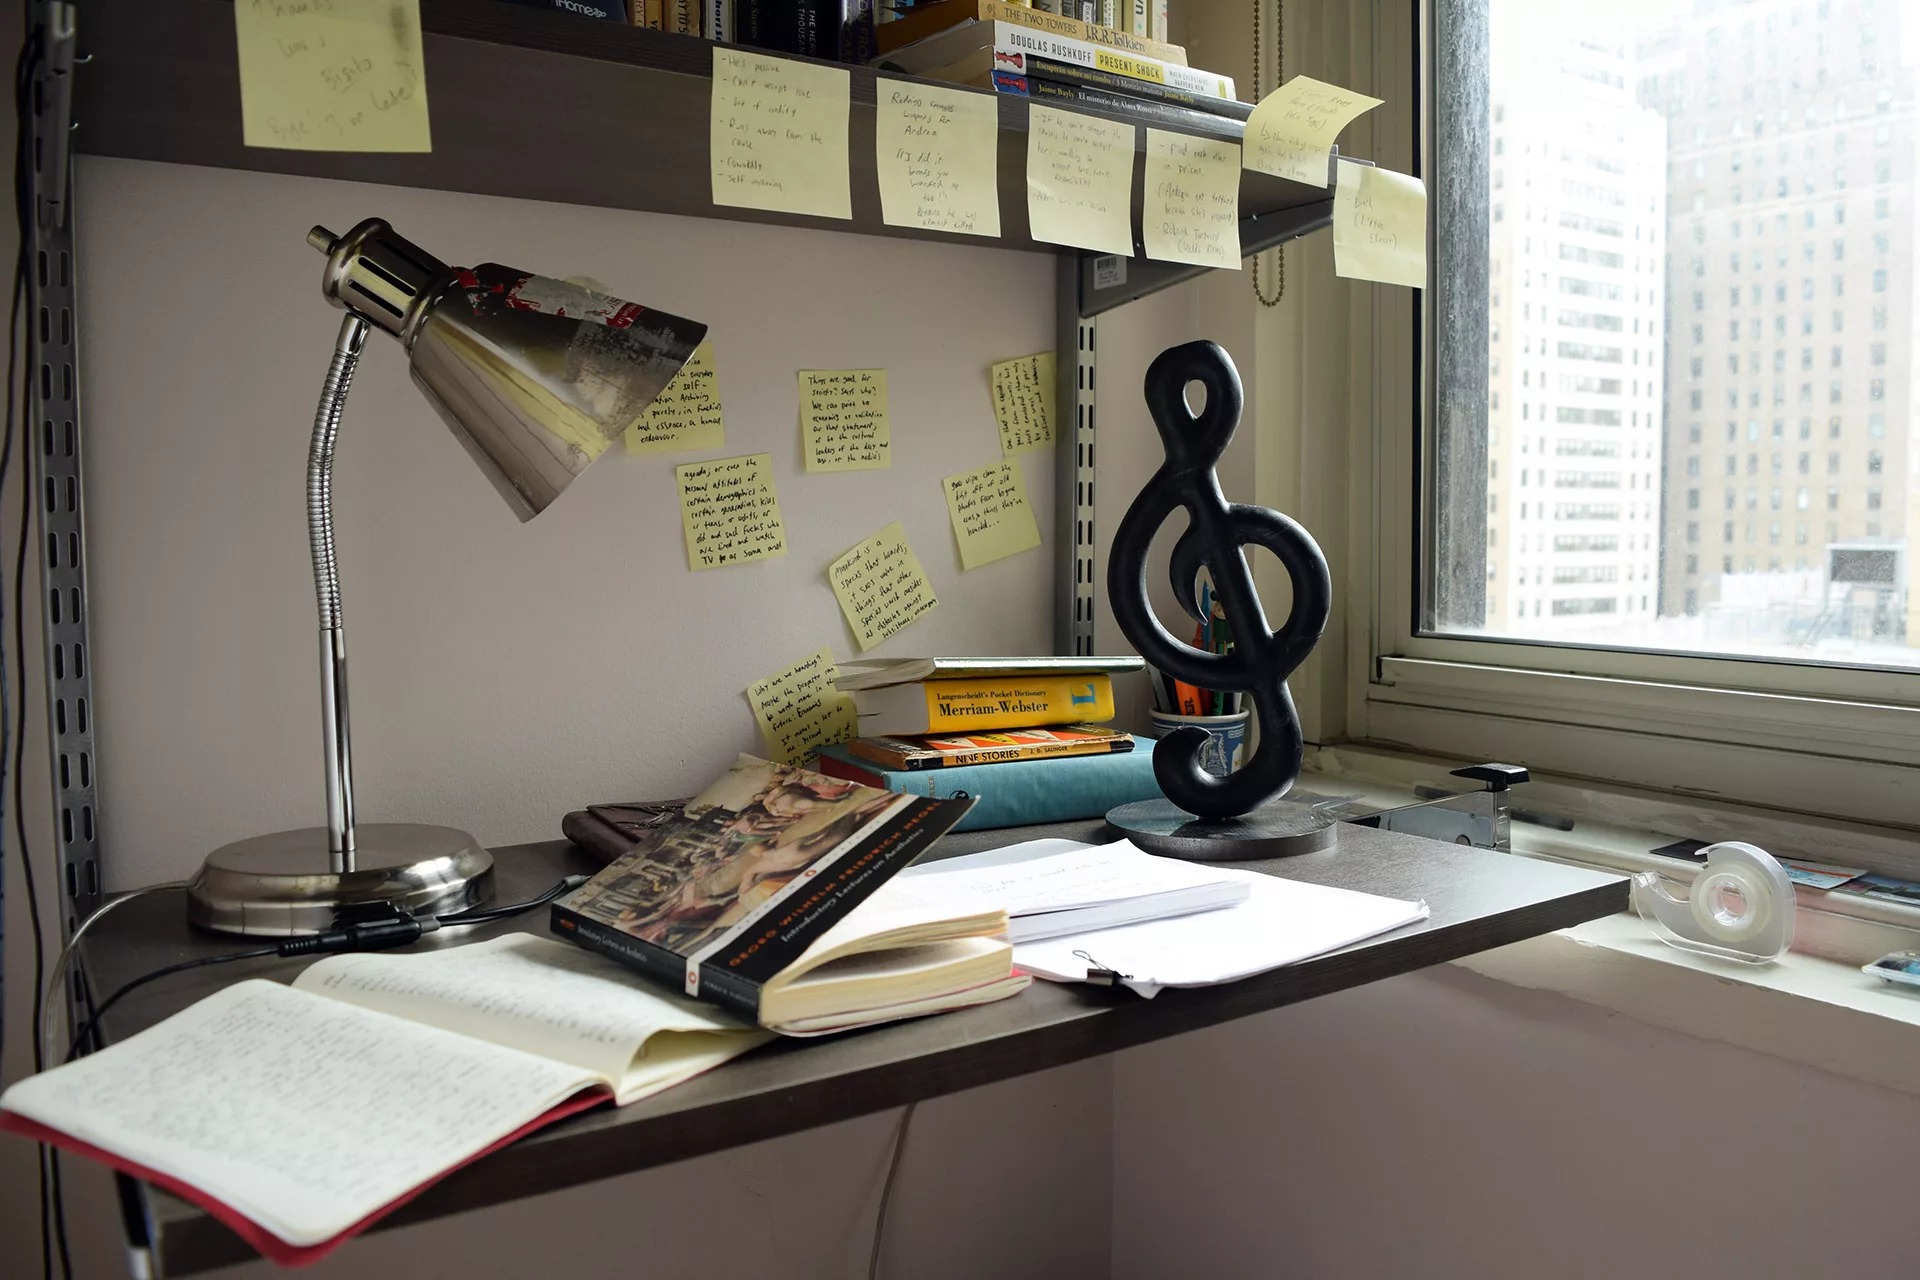 A black Sol stand on a messy desk.